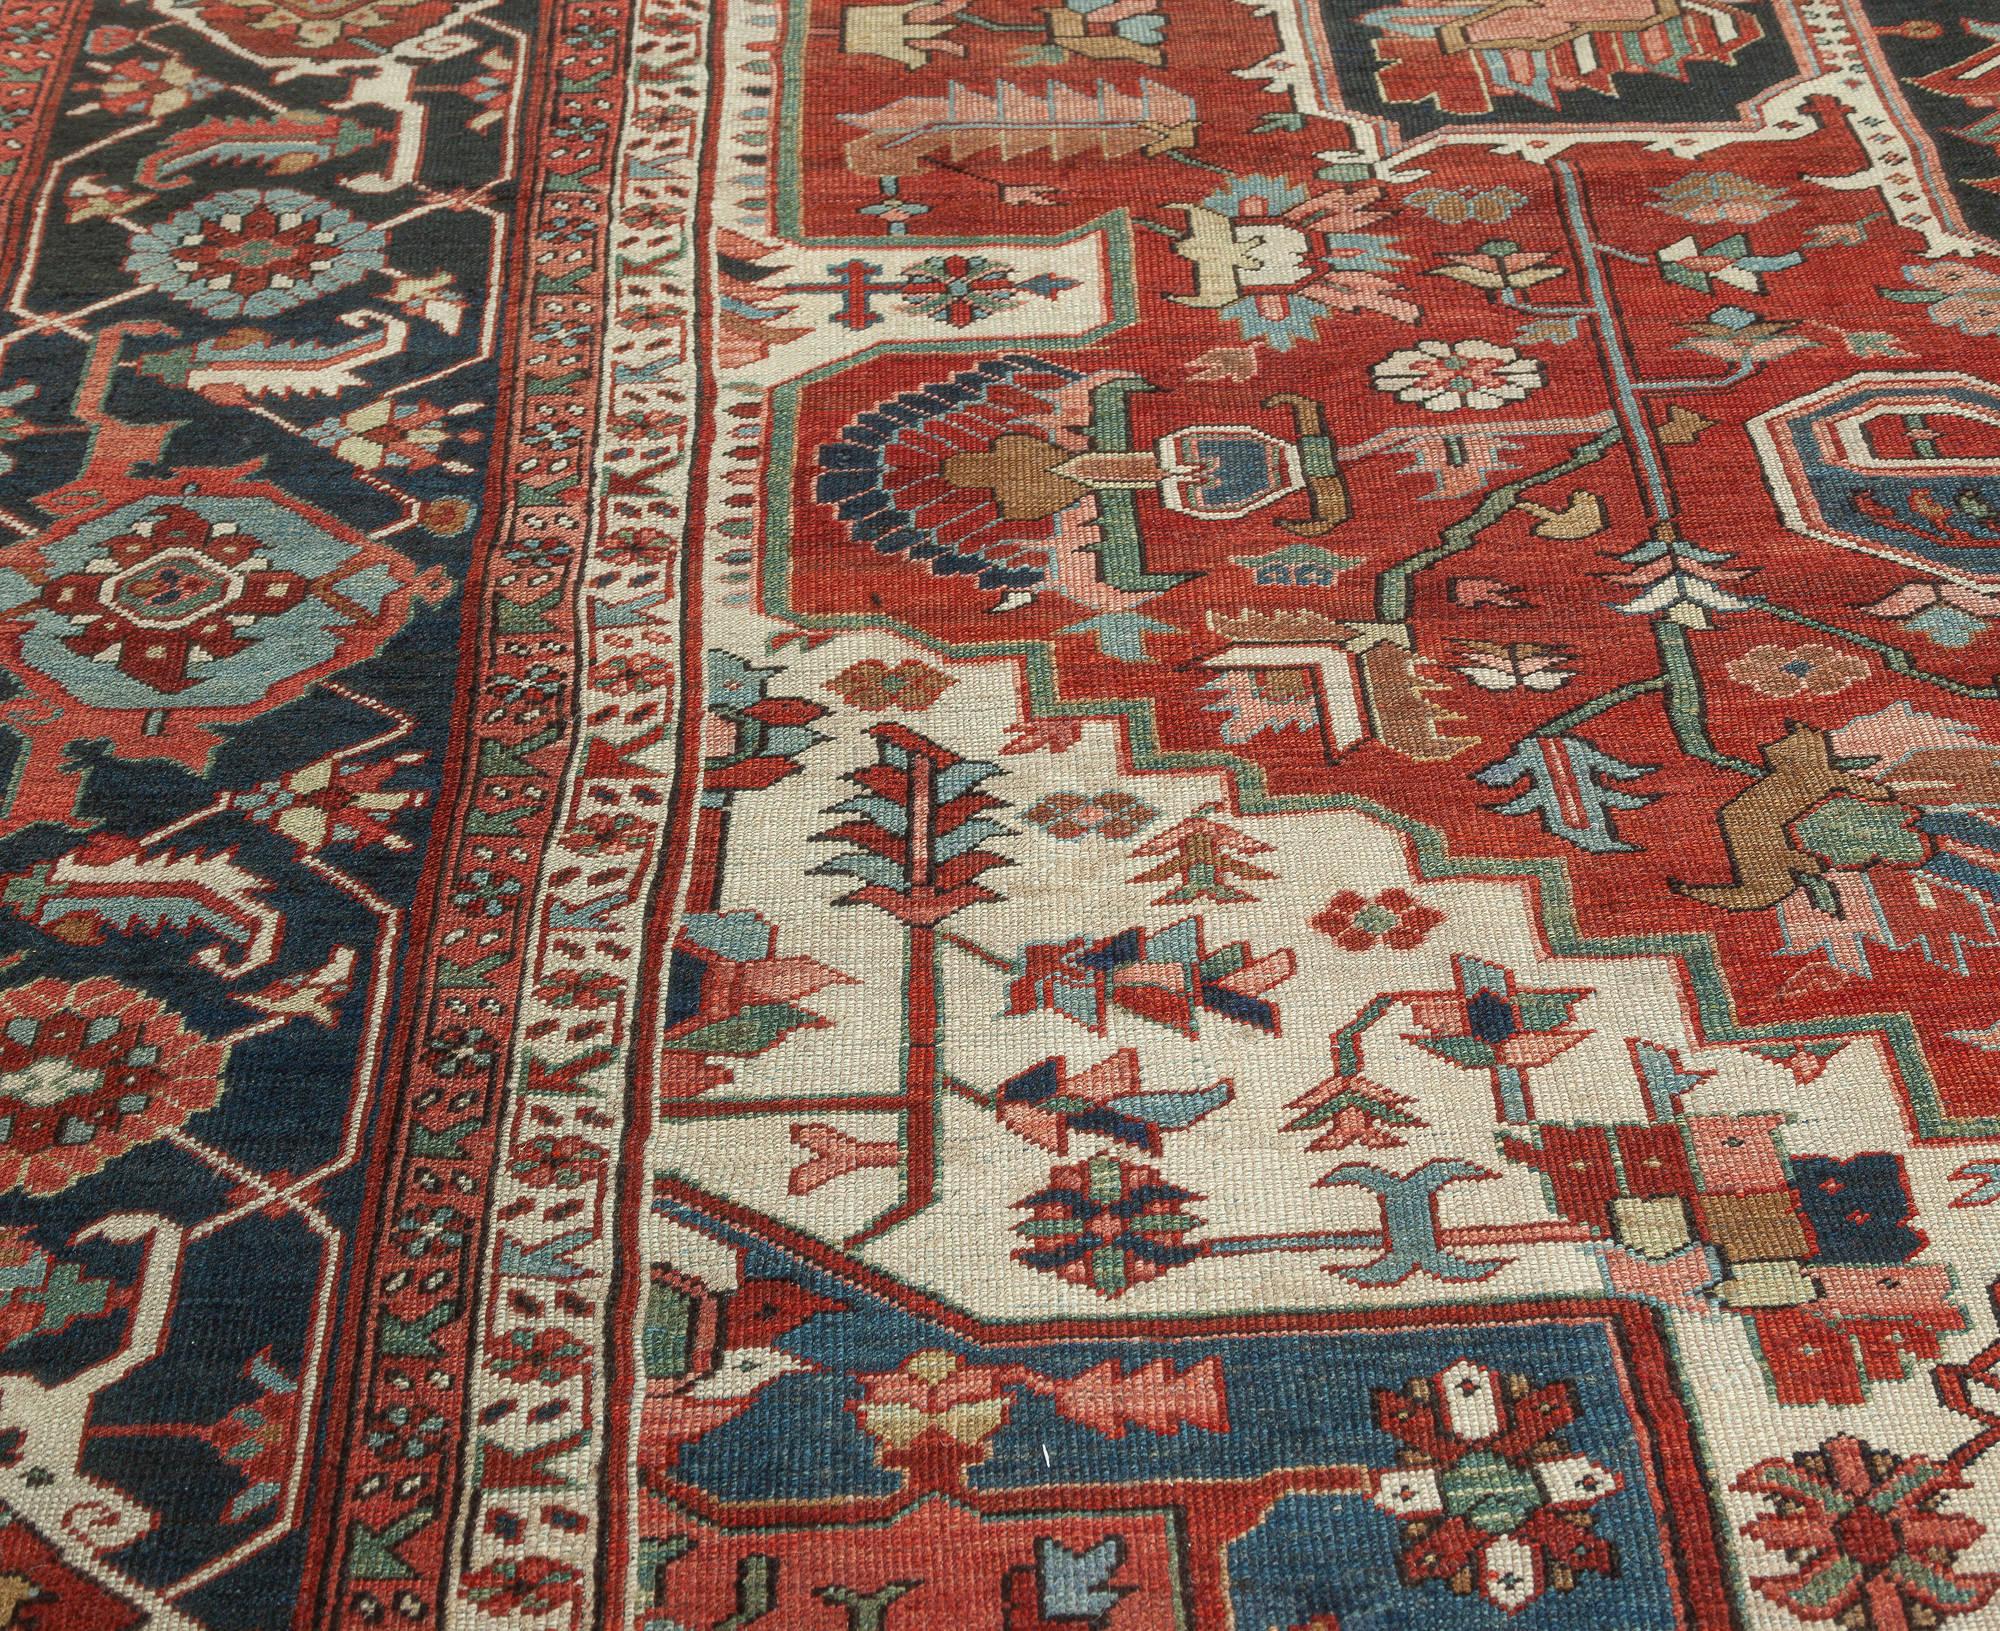 Hand-Knotted One-of-a-kind Antique Persian Heriz Rug in Beige, Blue, Pink, and Red